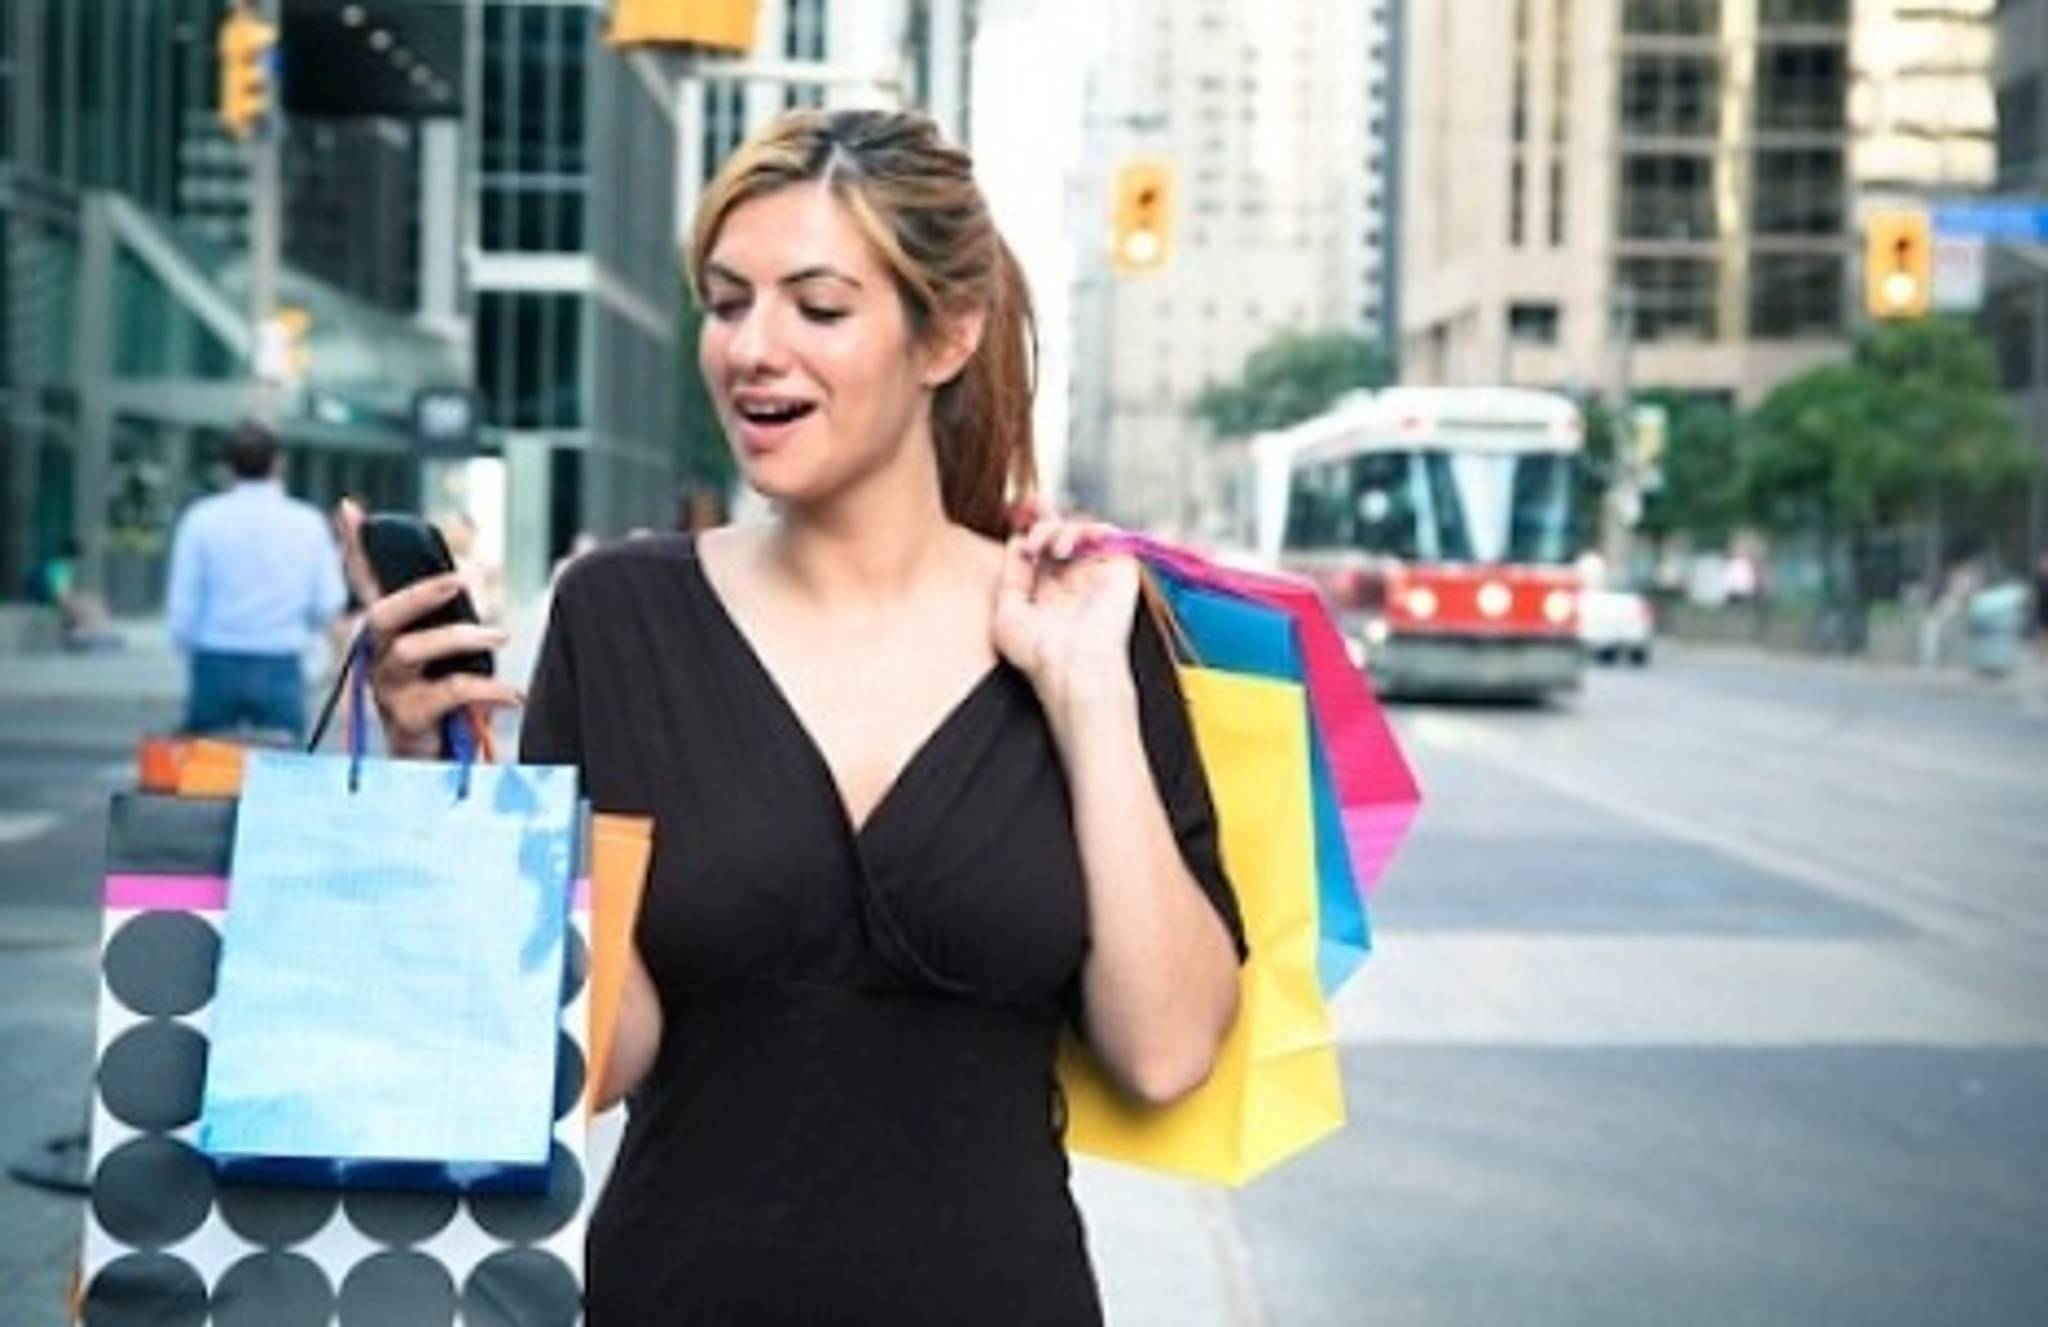 Most mobile shoppers are stationary